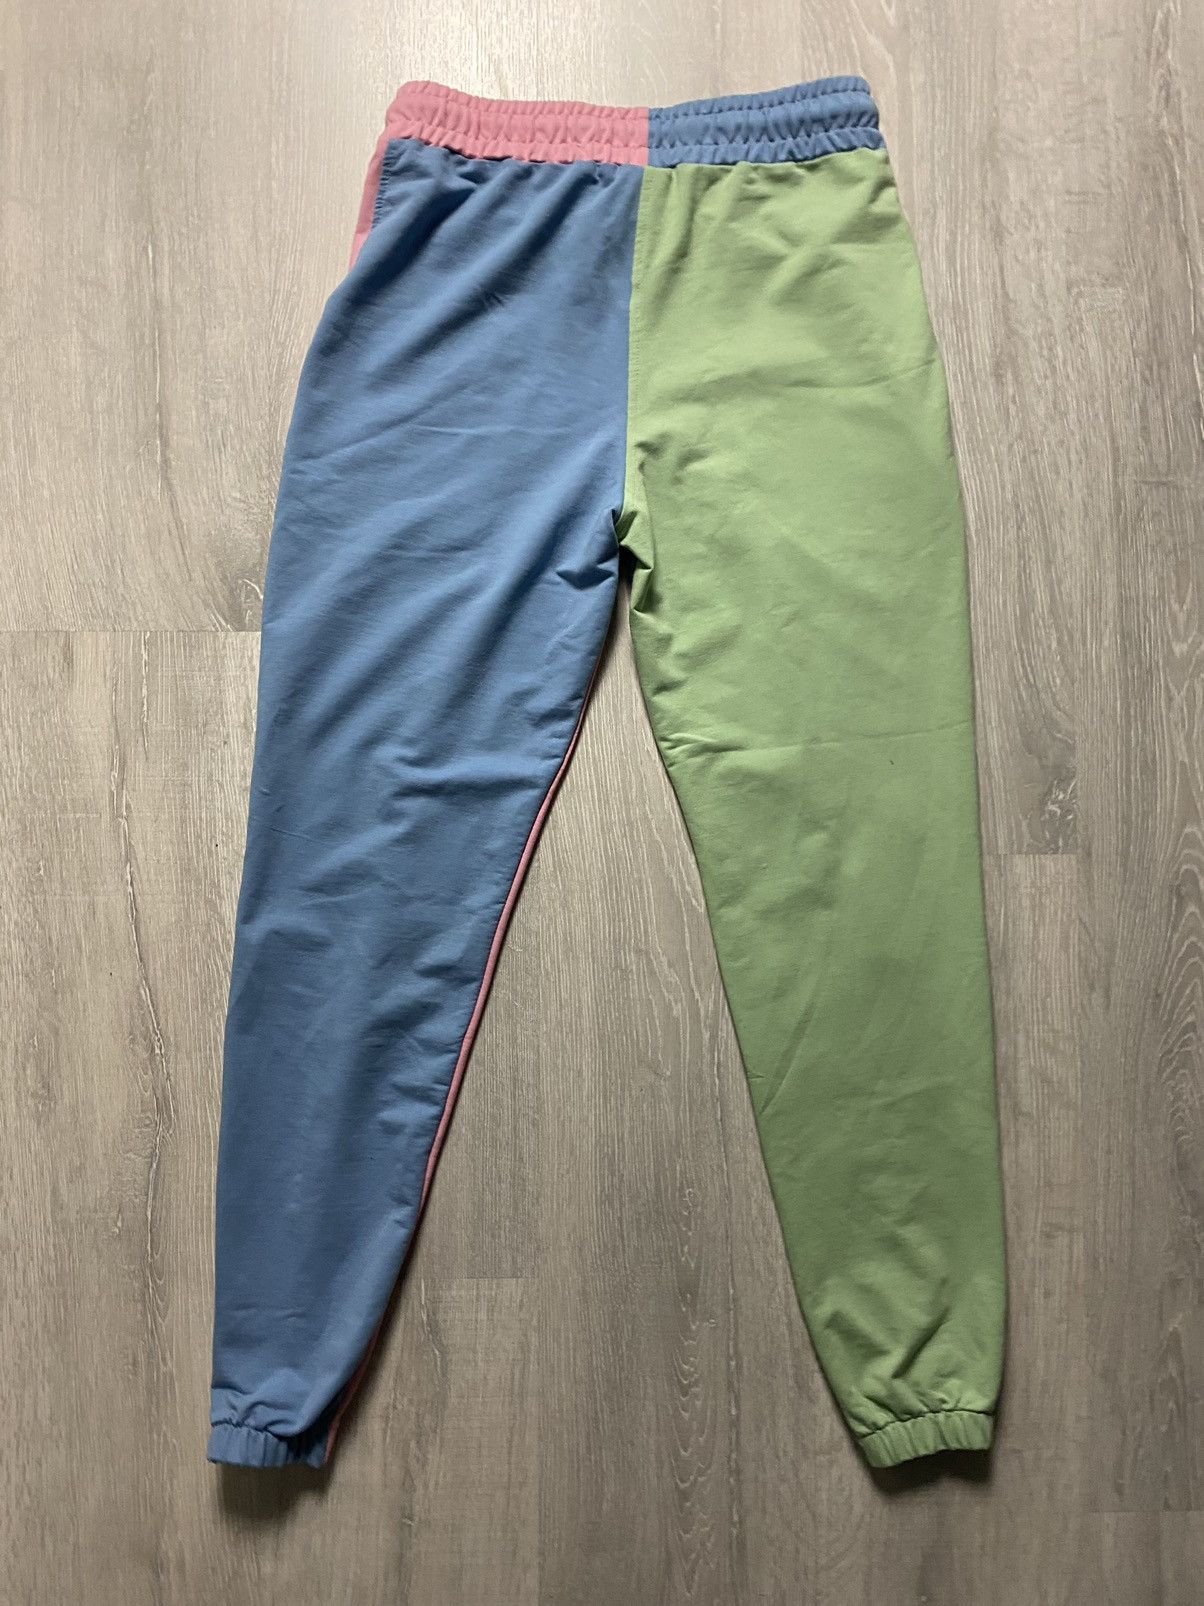 Nike Nike pink blue green sweatpants small swoosh Size 30" / US 8 / IT 44 - 4 Preview